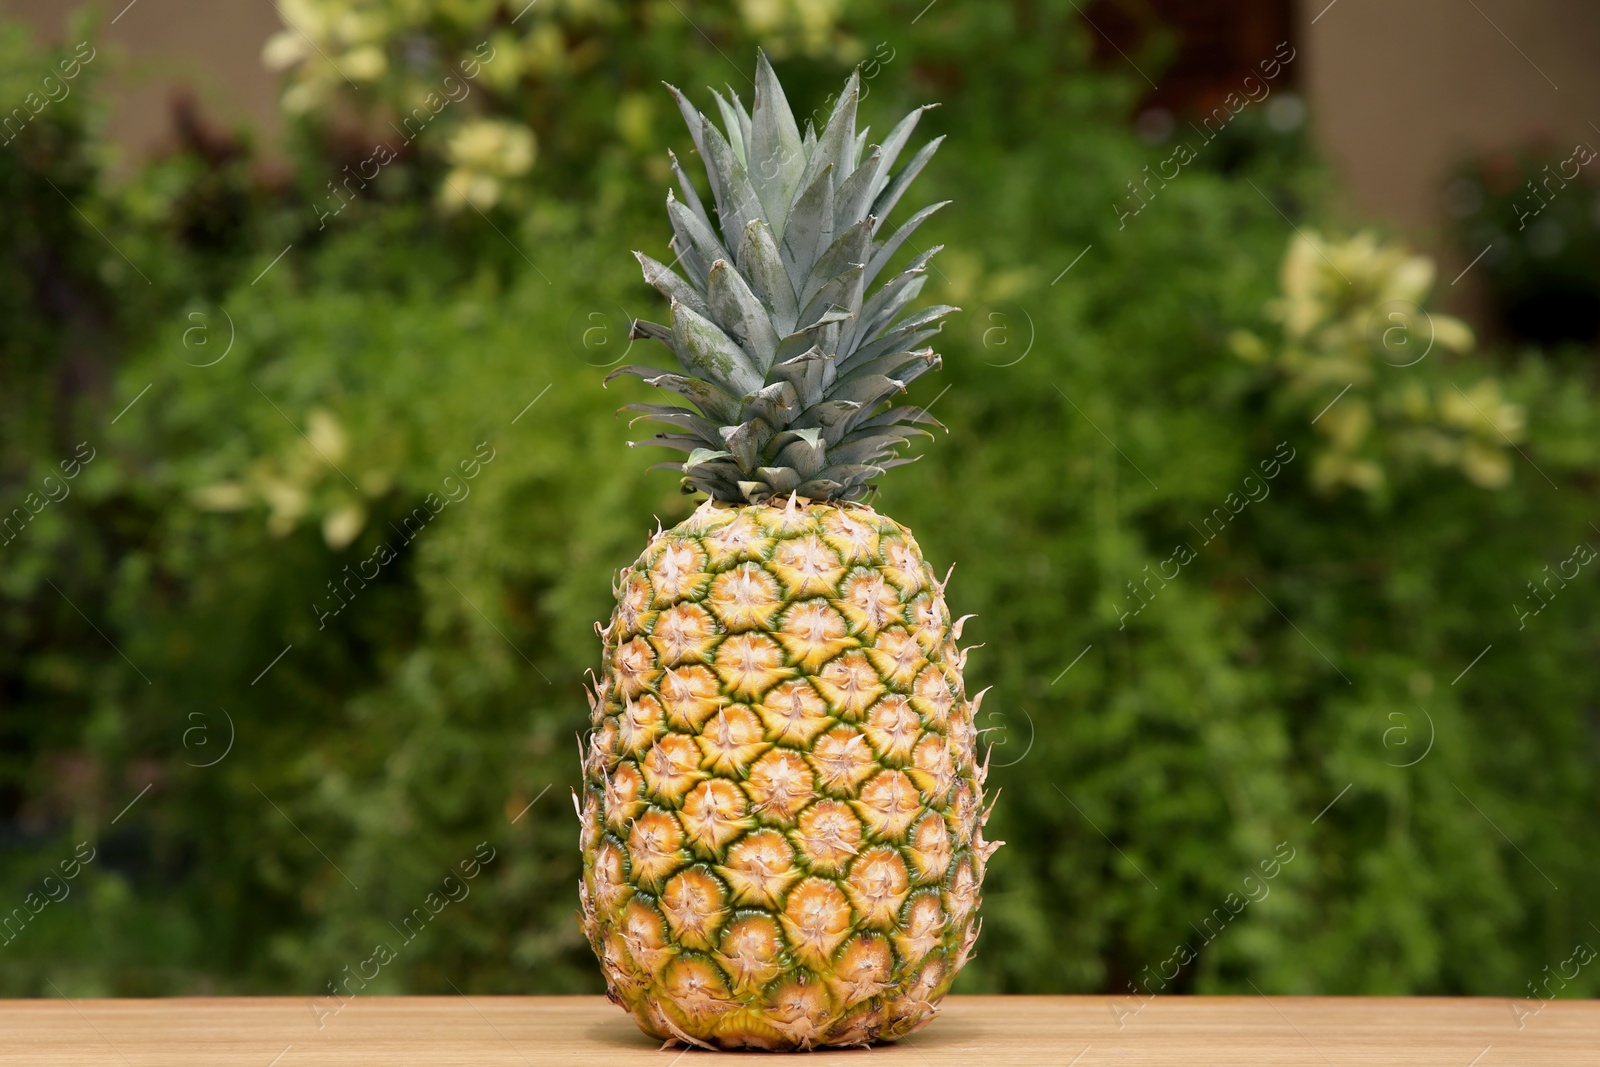 Photo of Delicious ripe pineapple on wooden table outdoors